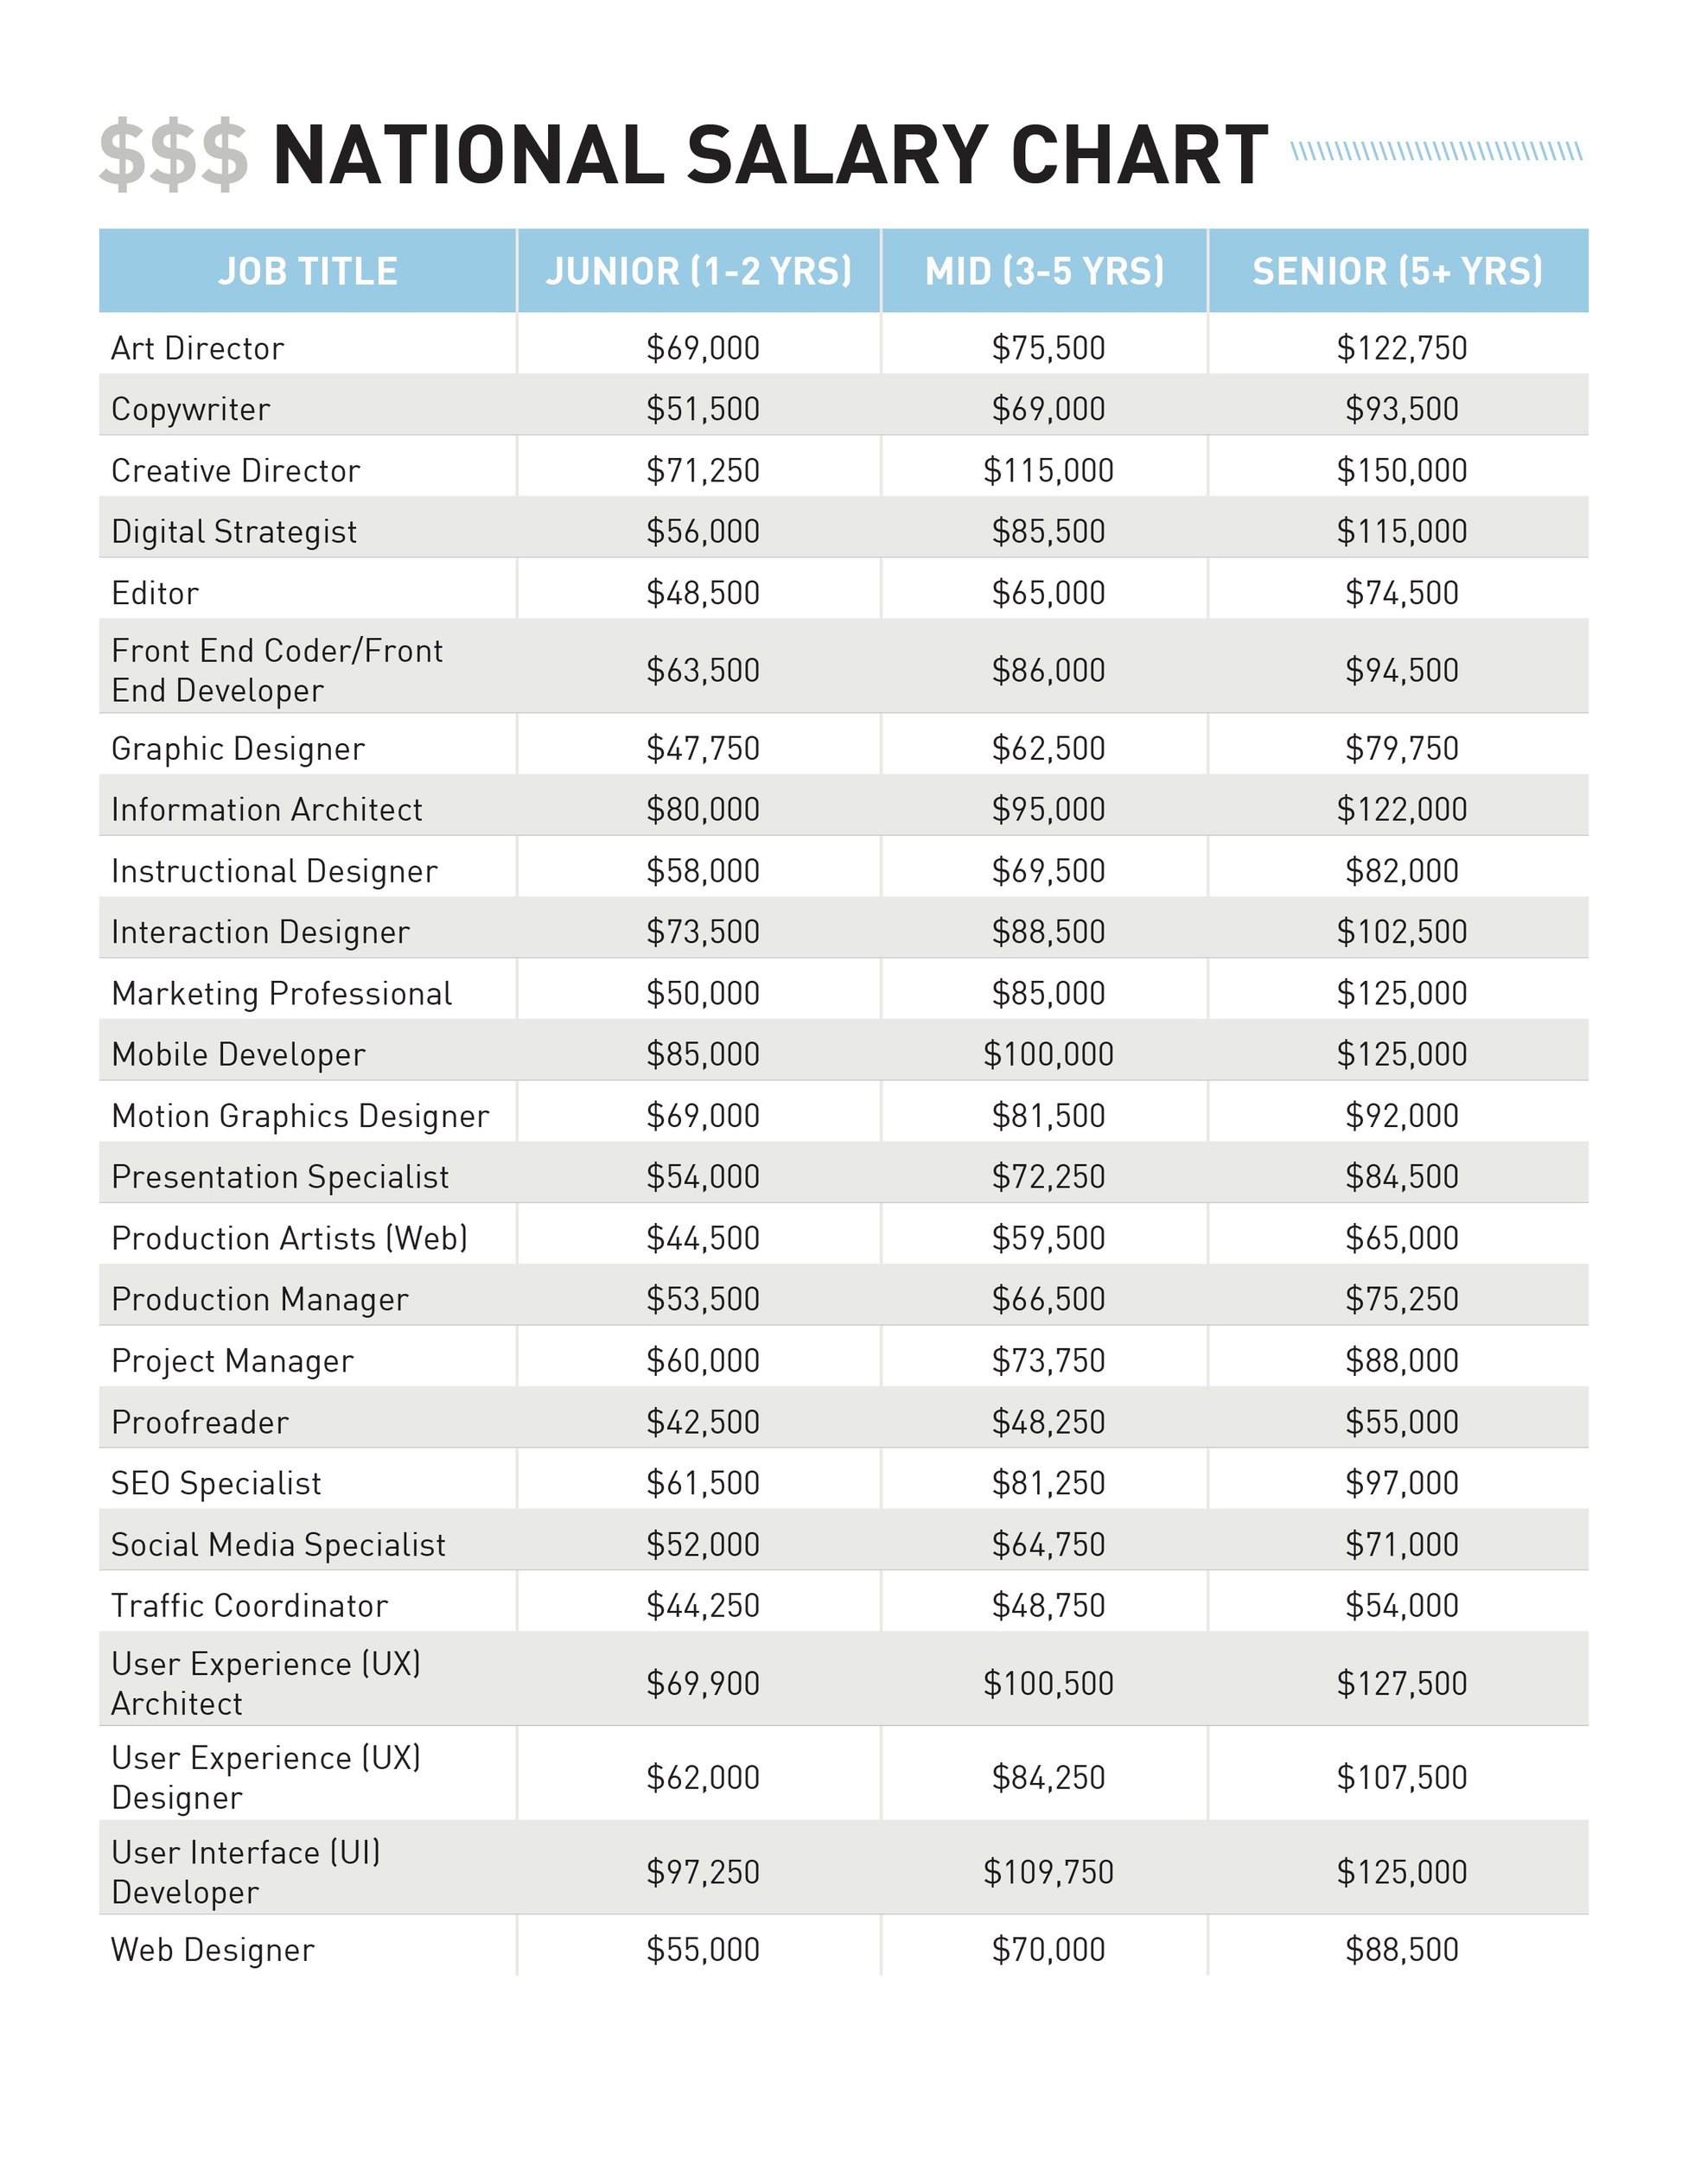 The Salary Guide Cheat Sheet